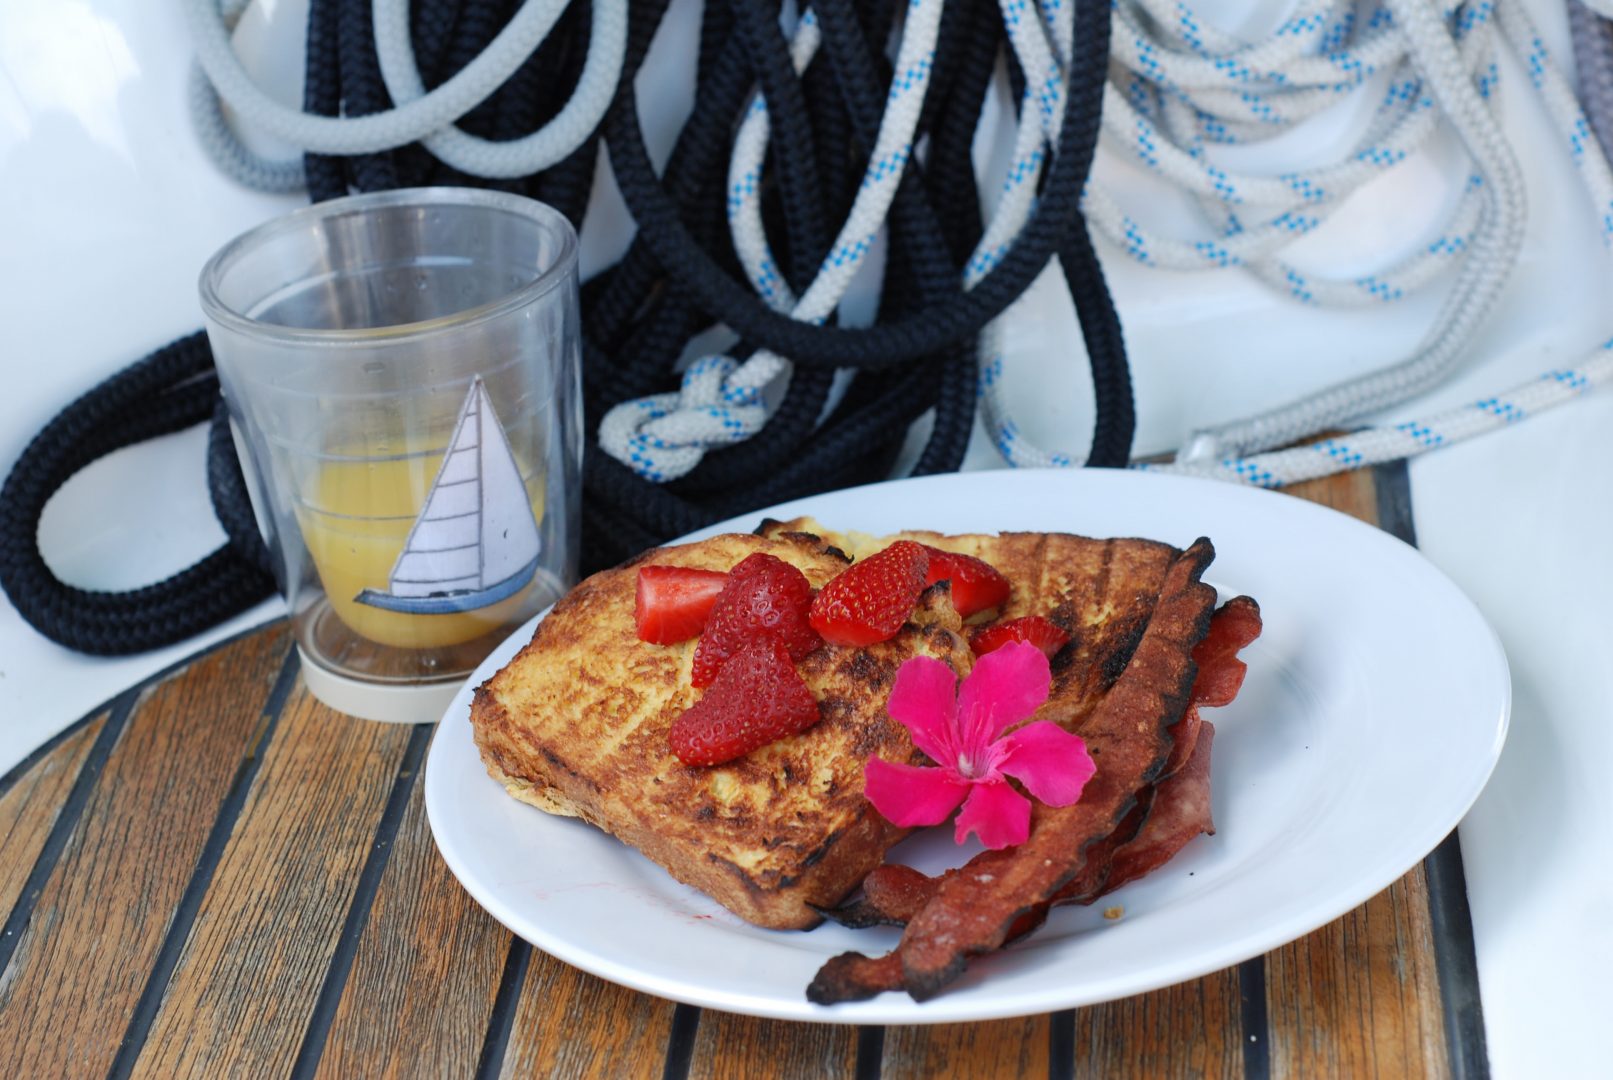 Host an Outdoor Mother’s Day Brunch with Grilled Coconut Rum French Toast and Grilled Cocktails